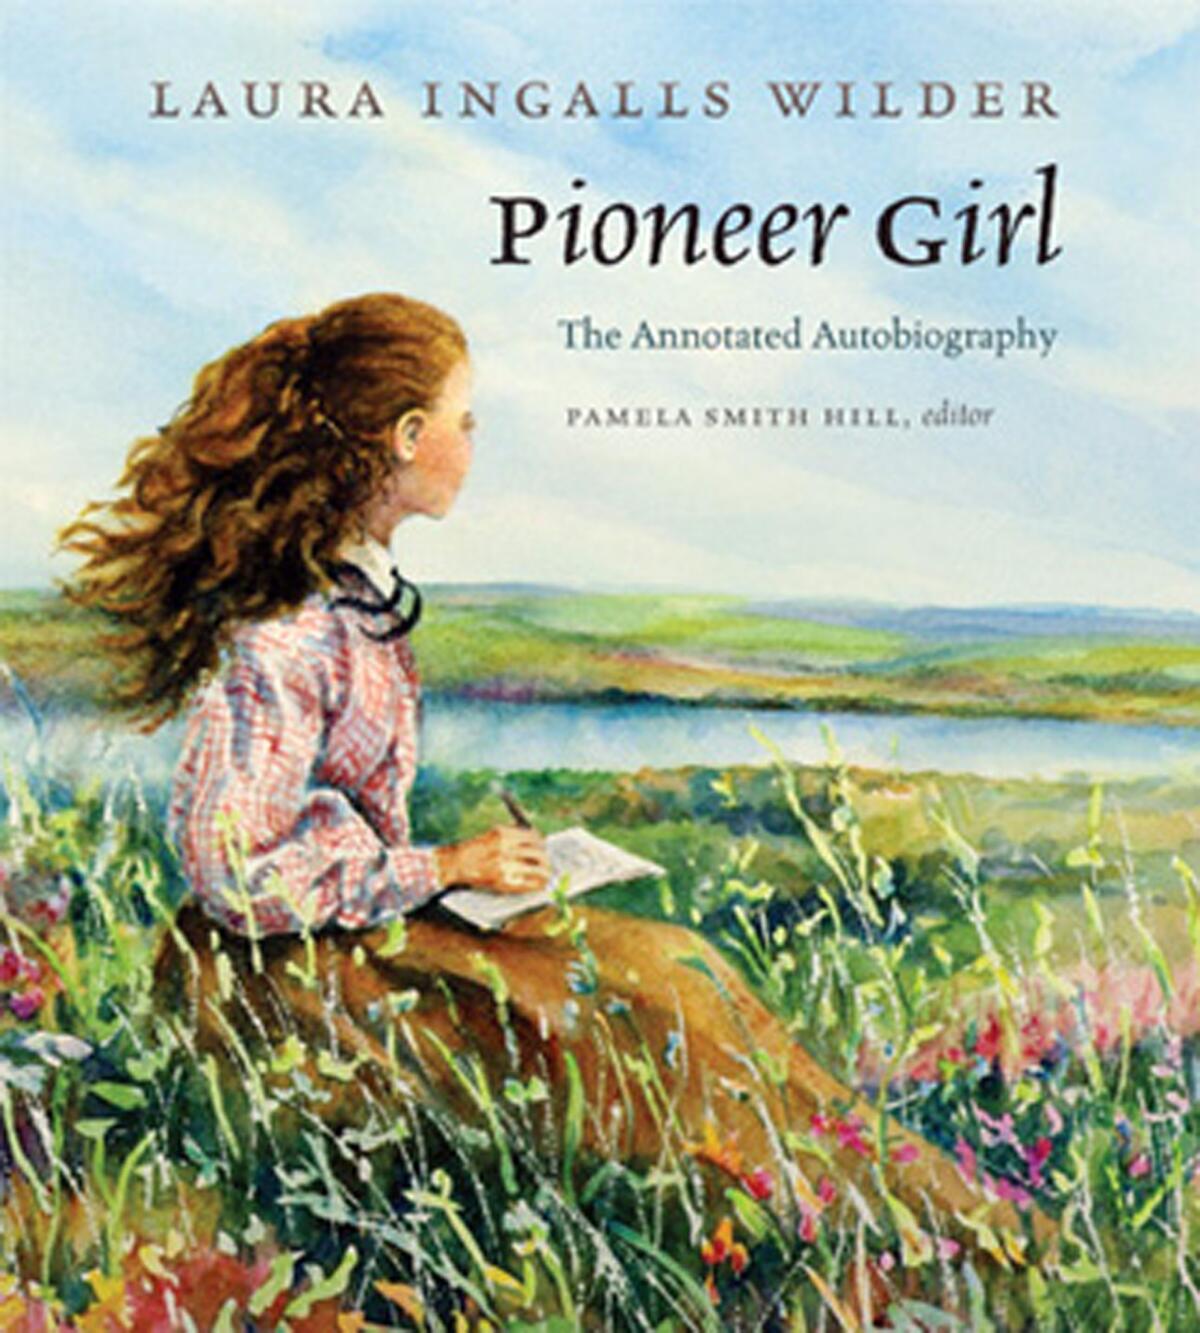 "Pioneer Girl: The Annotated Autobiography" of Laura Ingalls Wilder includes stories too grownup for "Little House on the Prairie."